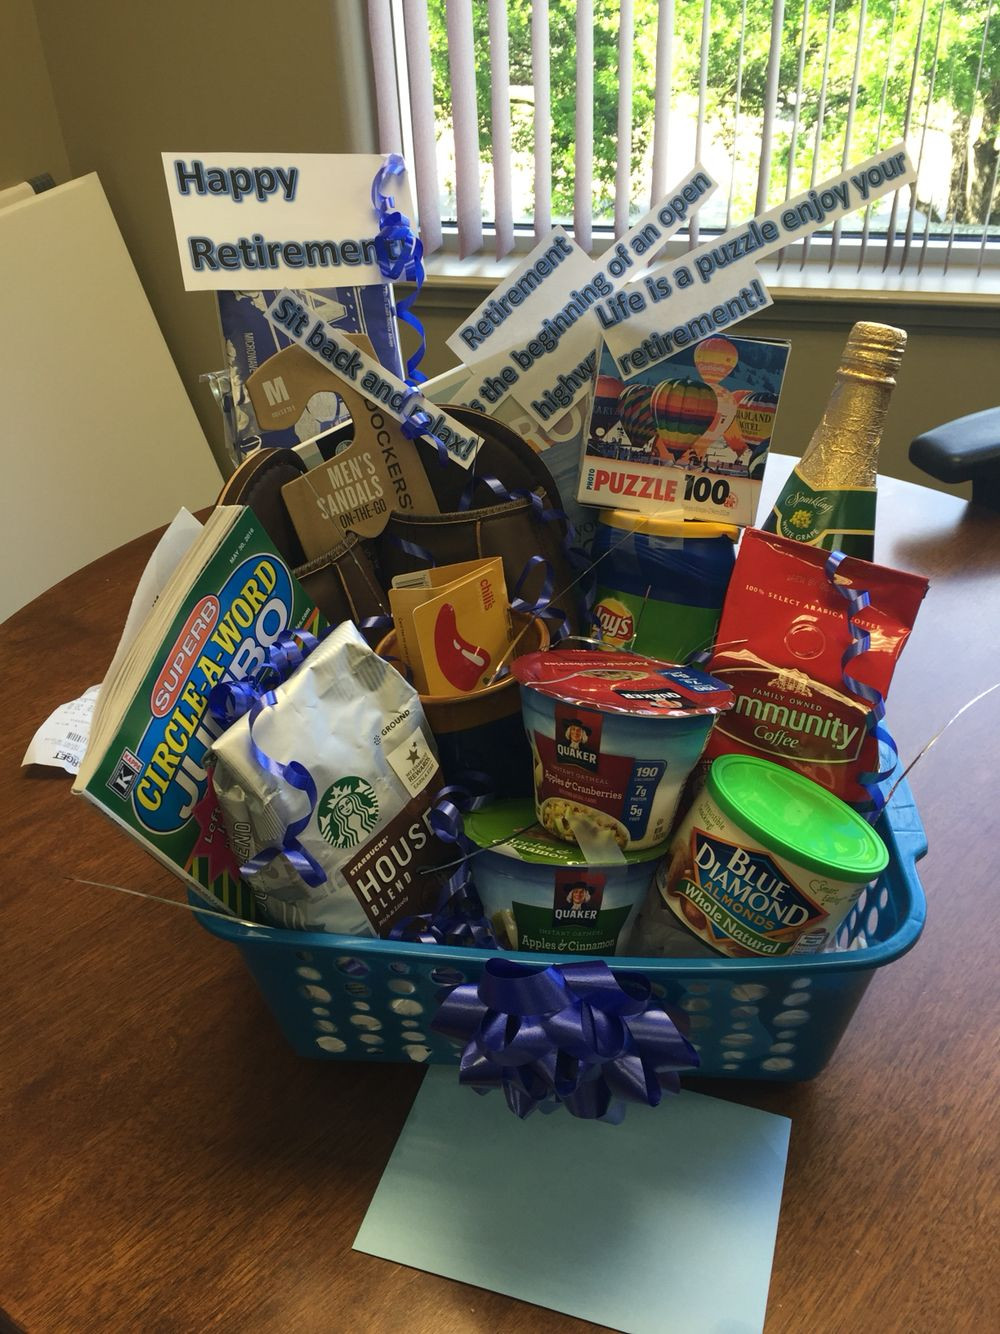 Retirement Party Gift Ideas For Friends
 Retirement basket I made for my co worker